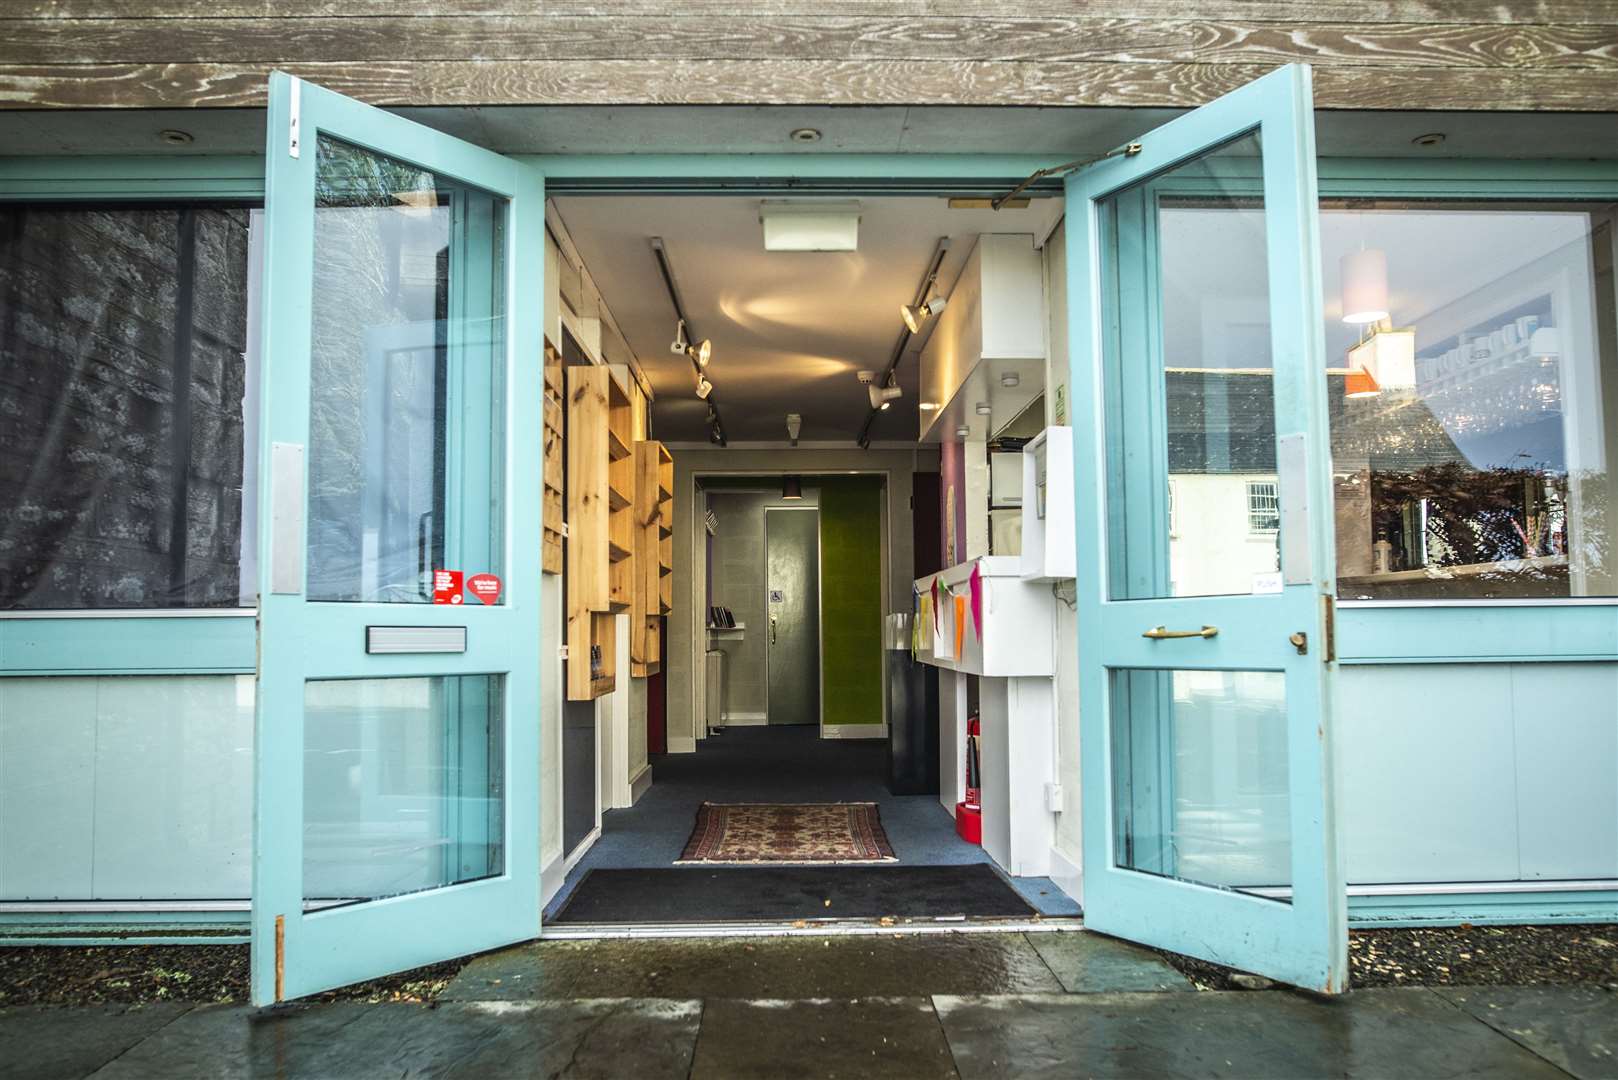 Work has been going on behind the currently closed doors of Lyth Arts Centre. Picture: SDM Photography